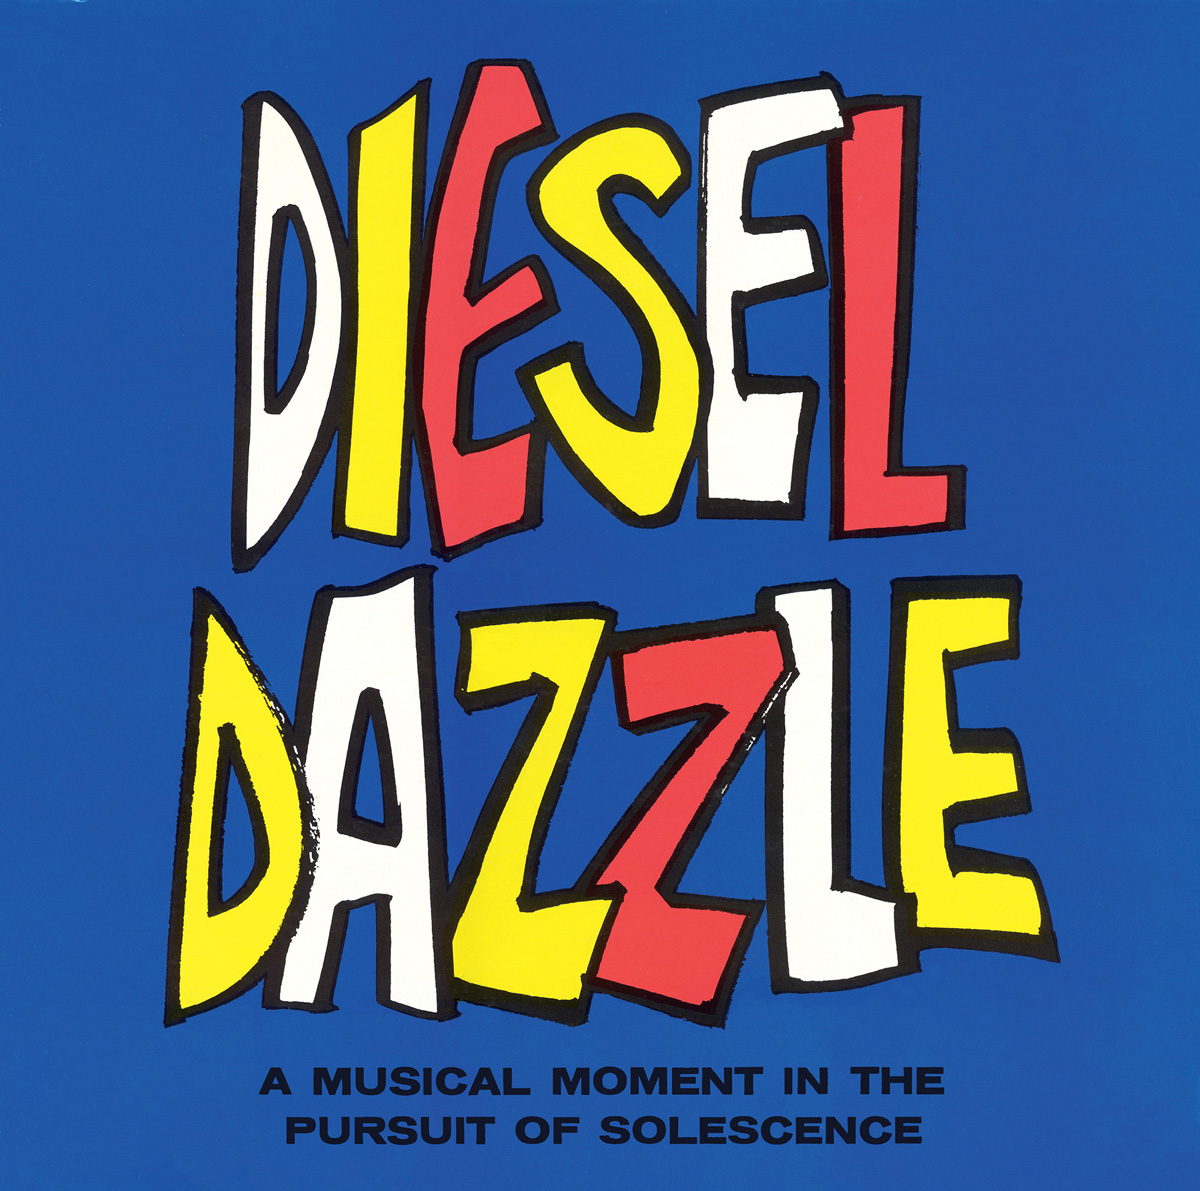 An album cover from 1966 for a  Detroit Diesel Engine Division of General Motors show, titled “Diesel Dazzle.”